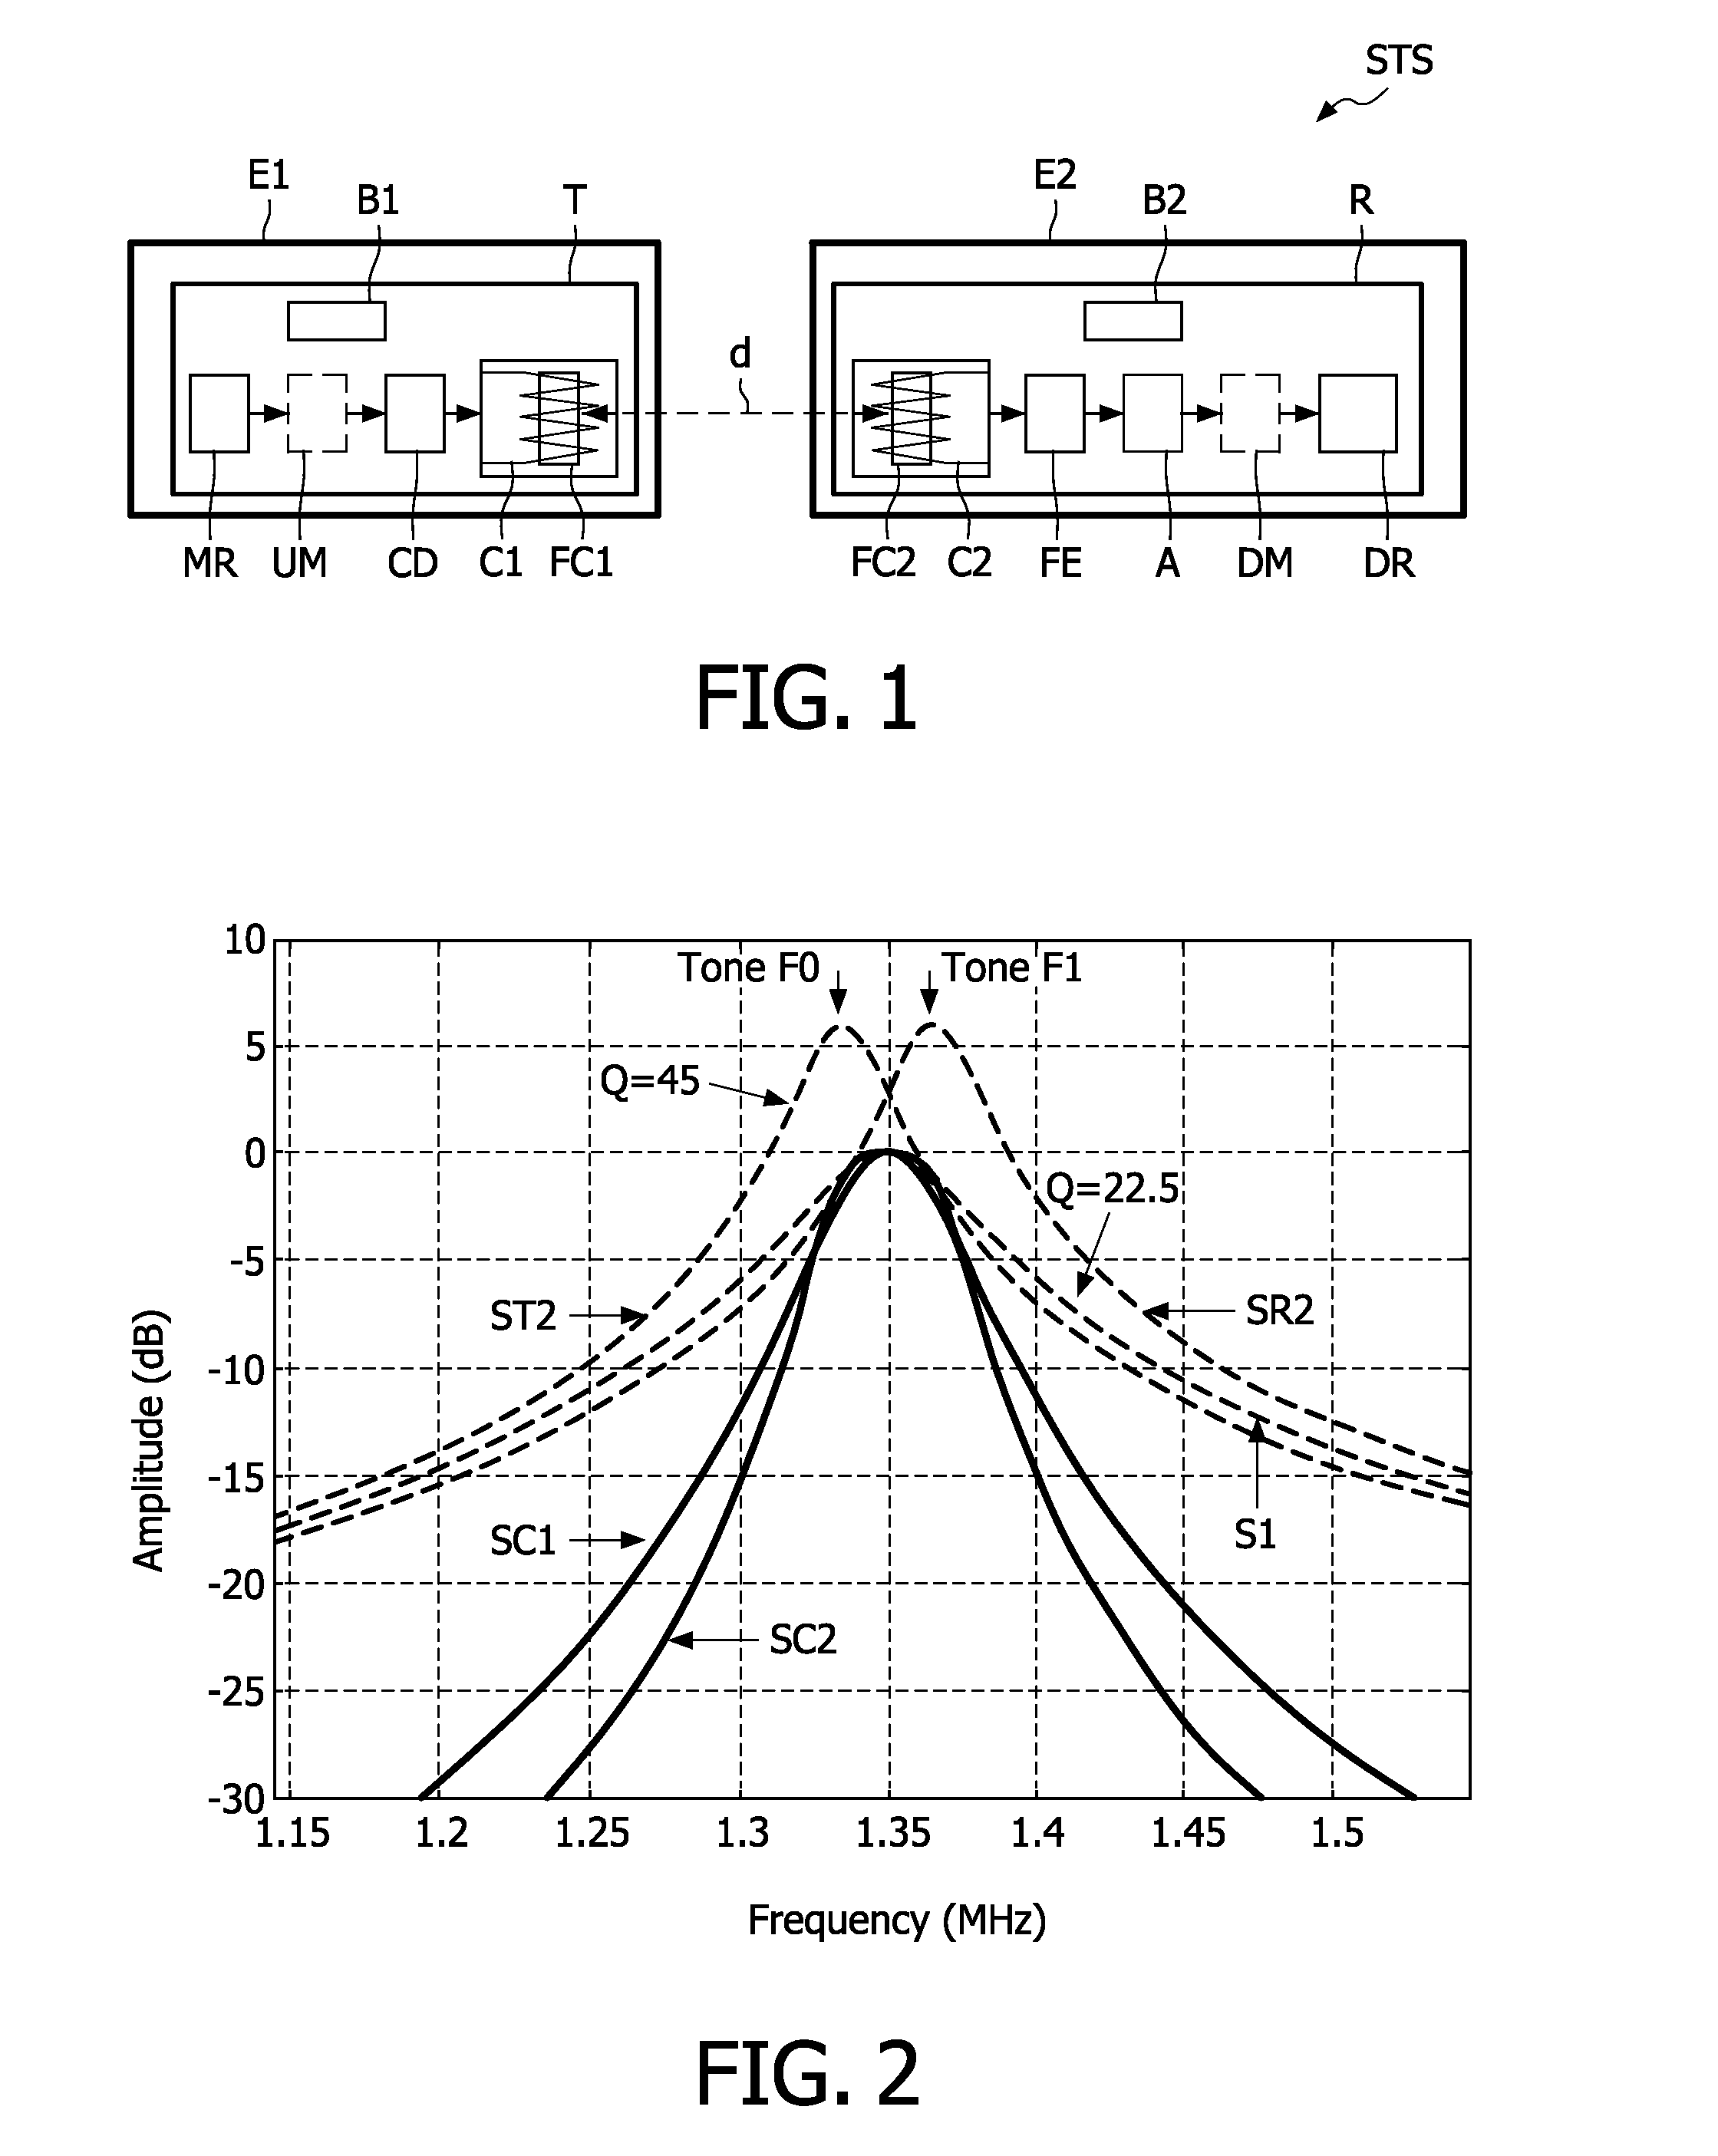 System for signal transmission by magnetic induction in a near-field propagation mode, with antenna tuning for link budget optimization